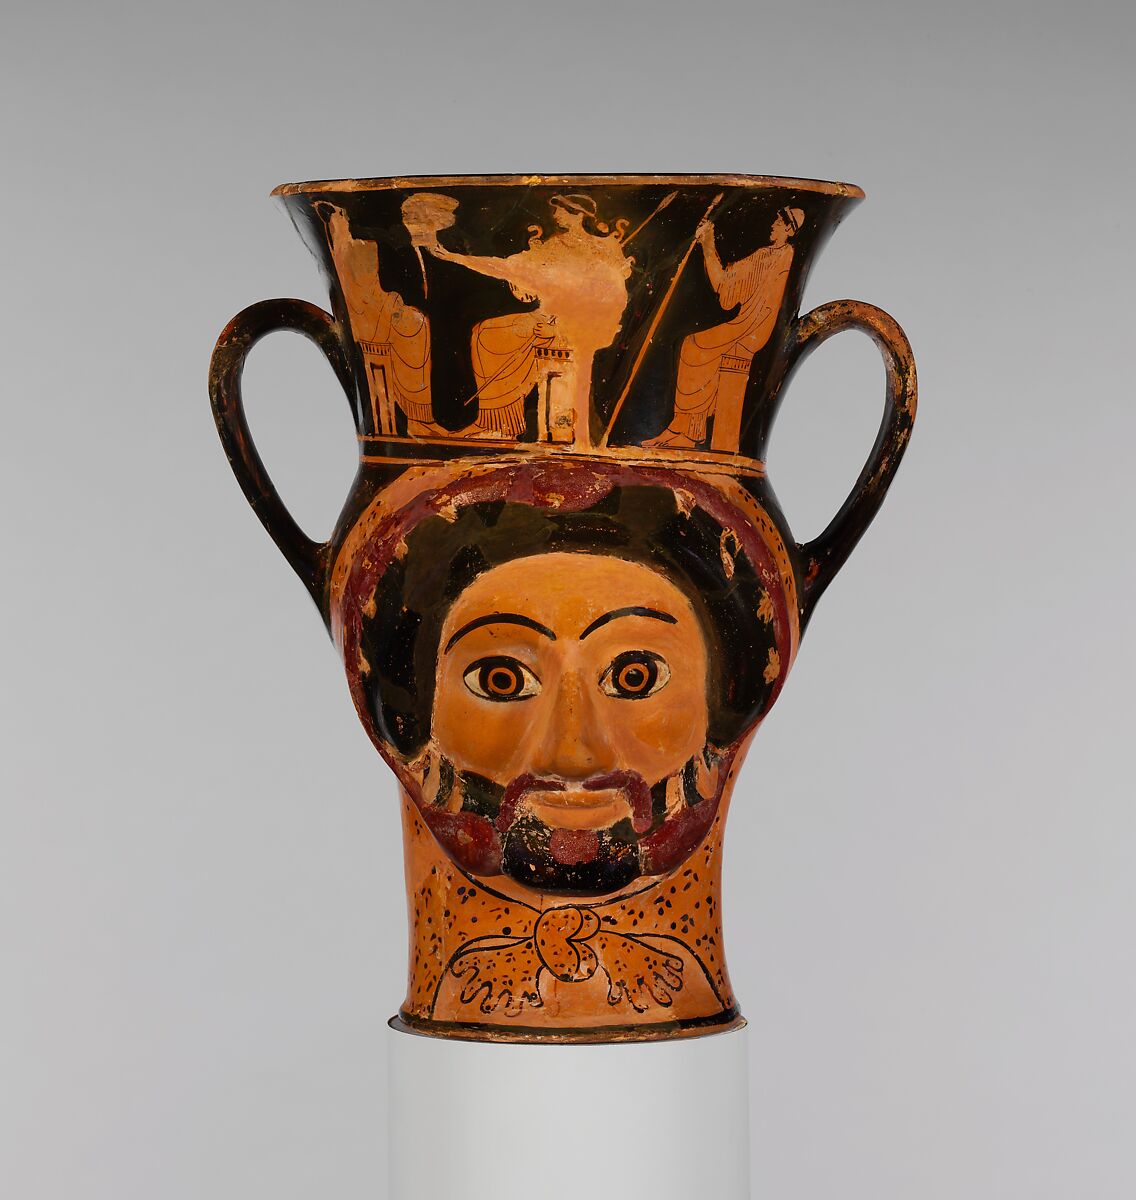 Terracotta kantharos (drinking cup) in the form of the heads of Herakles and of a woman, Attributed to the Syriskos Painter, Terracotta, Greek, Attic 